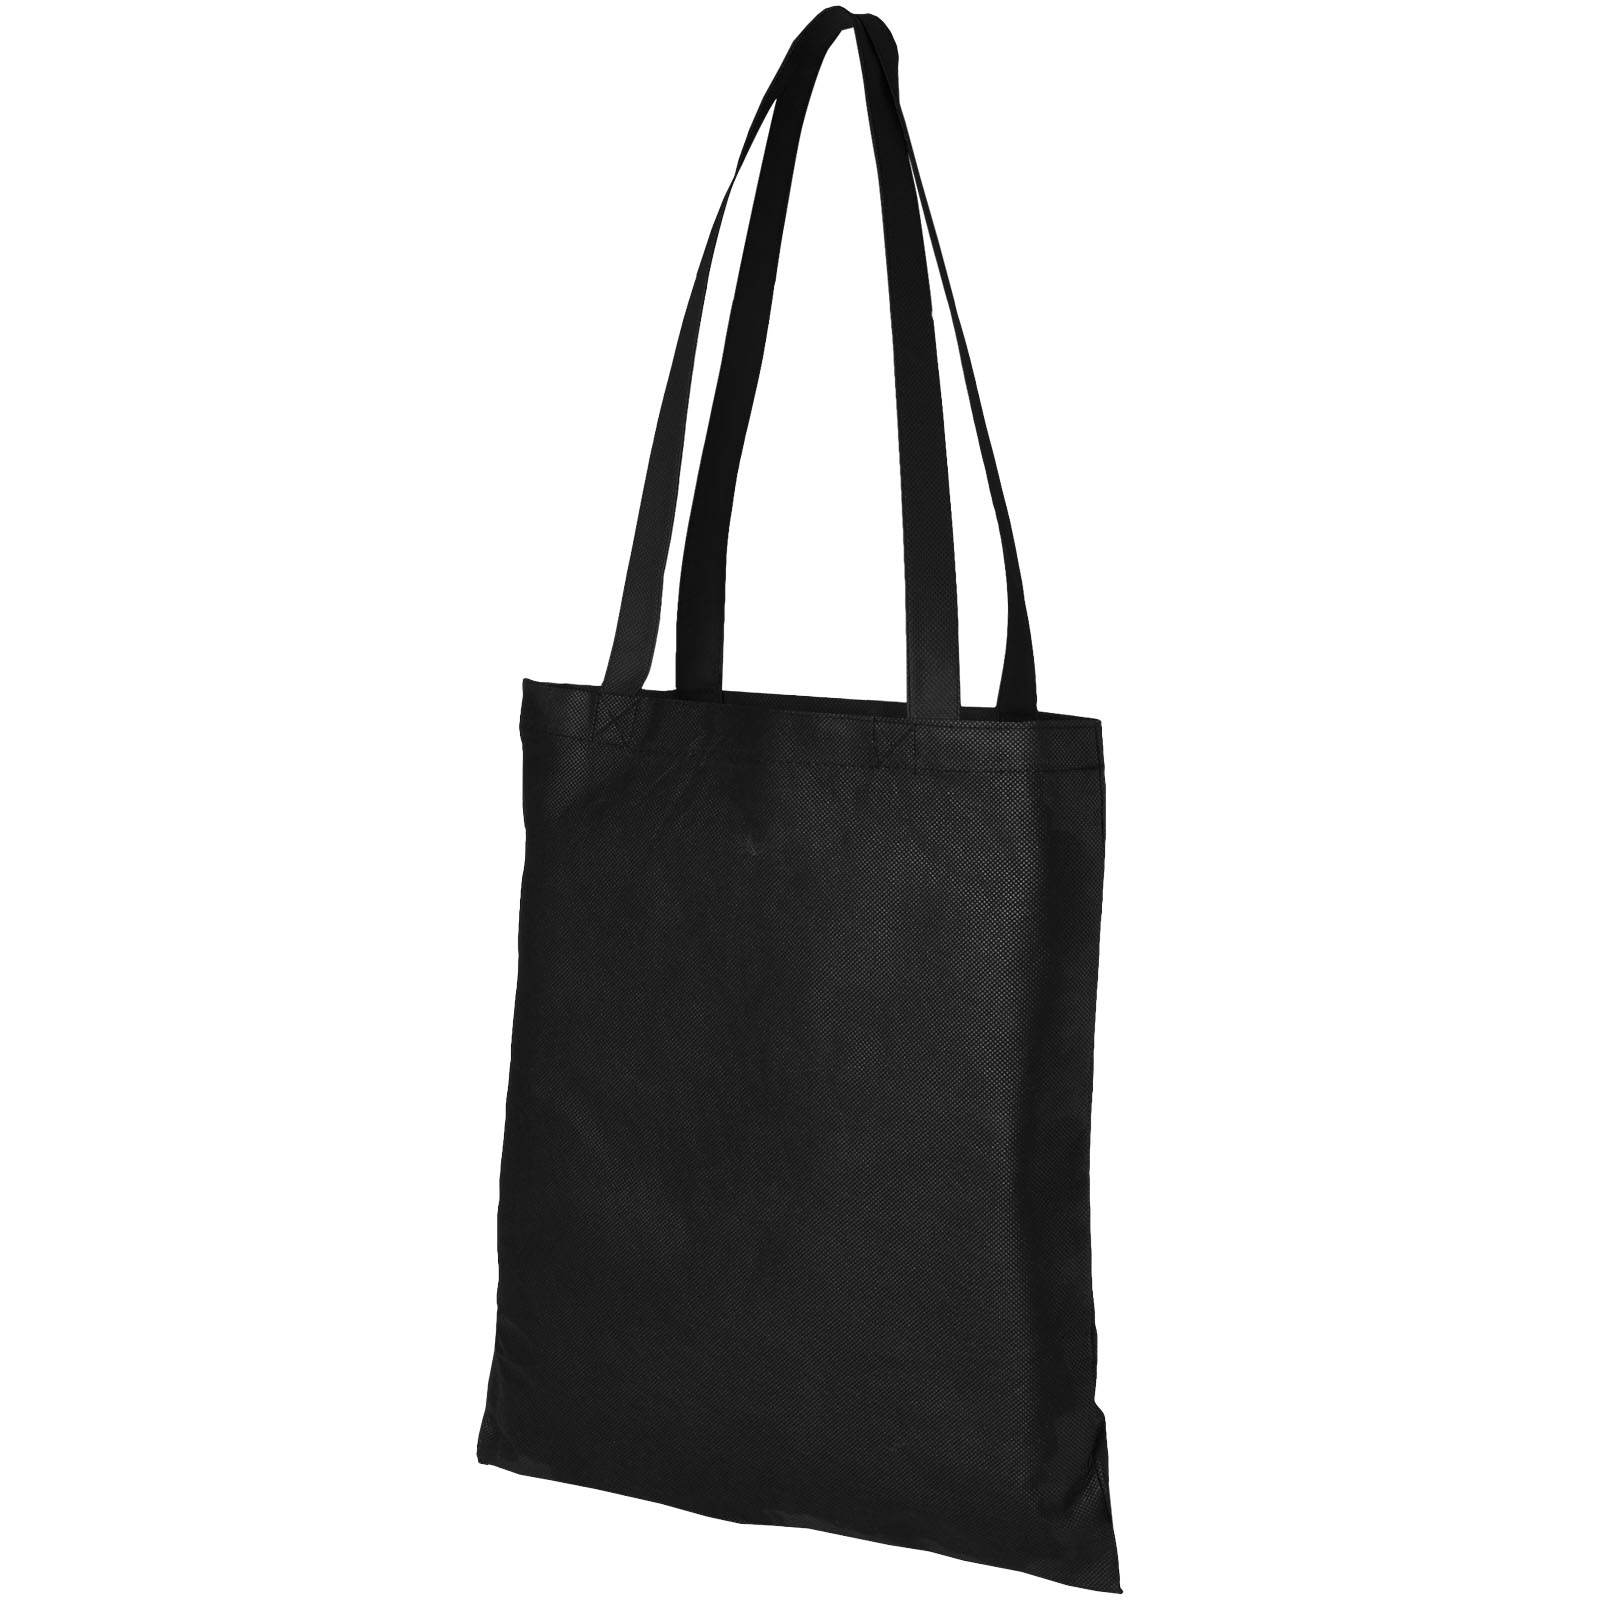 Advertising Conference bags - Zeus large non-woven convention tote bag 6L